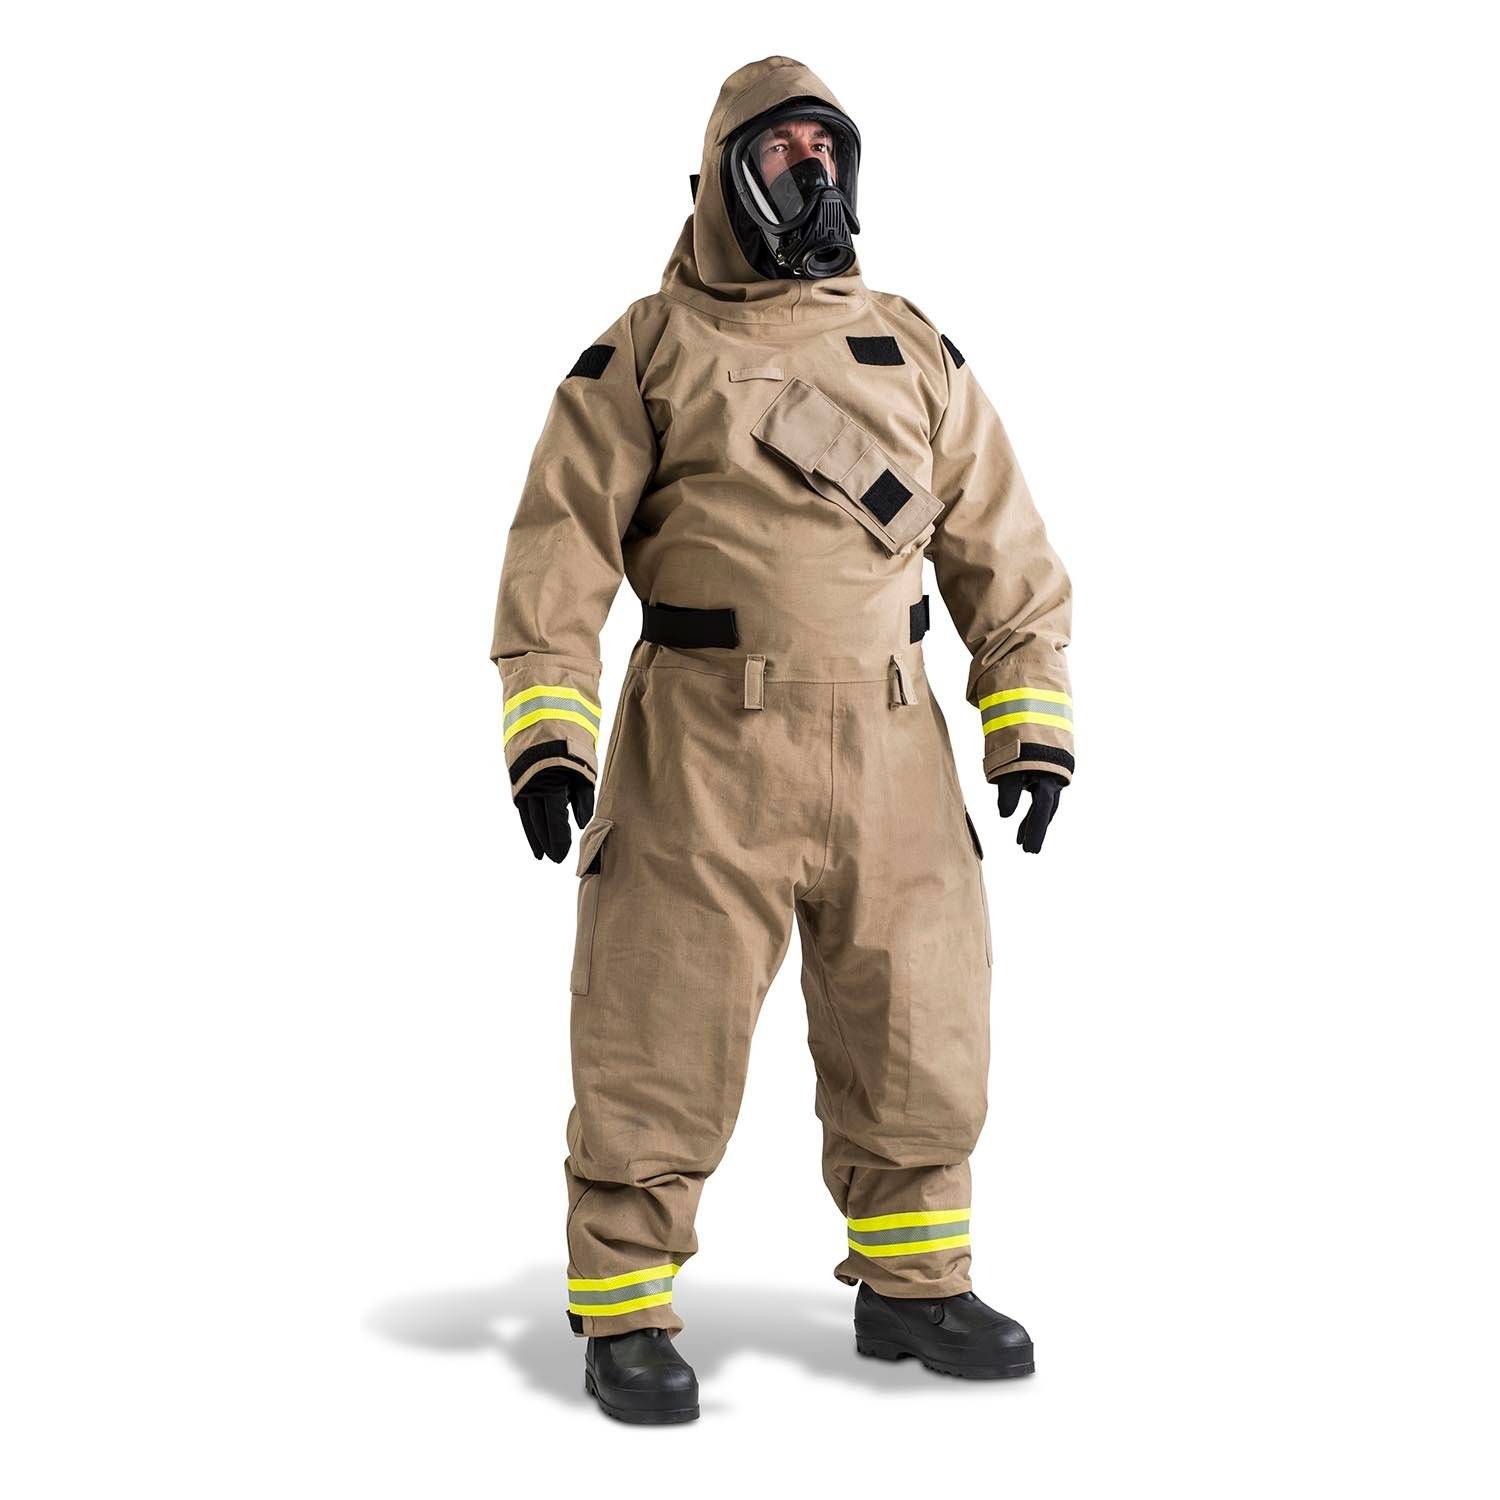 LION MT94 NFPA MAXIMUM PROTECTION AND MOBILITY SUIT NO RADIO